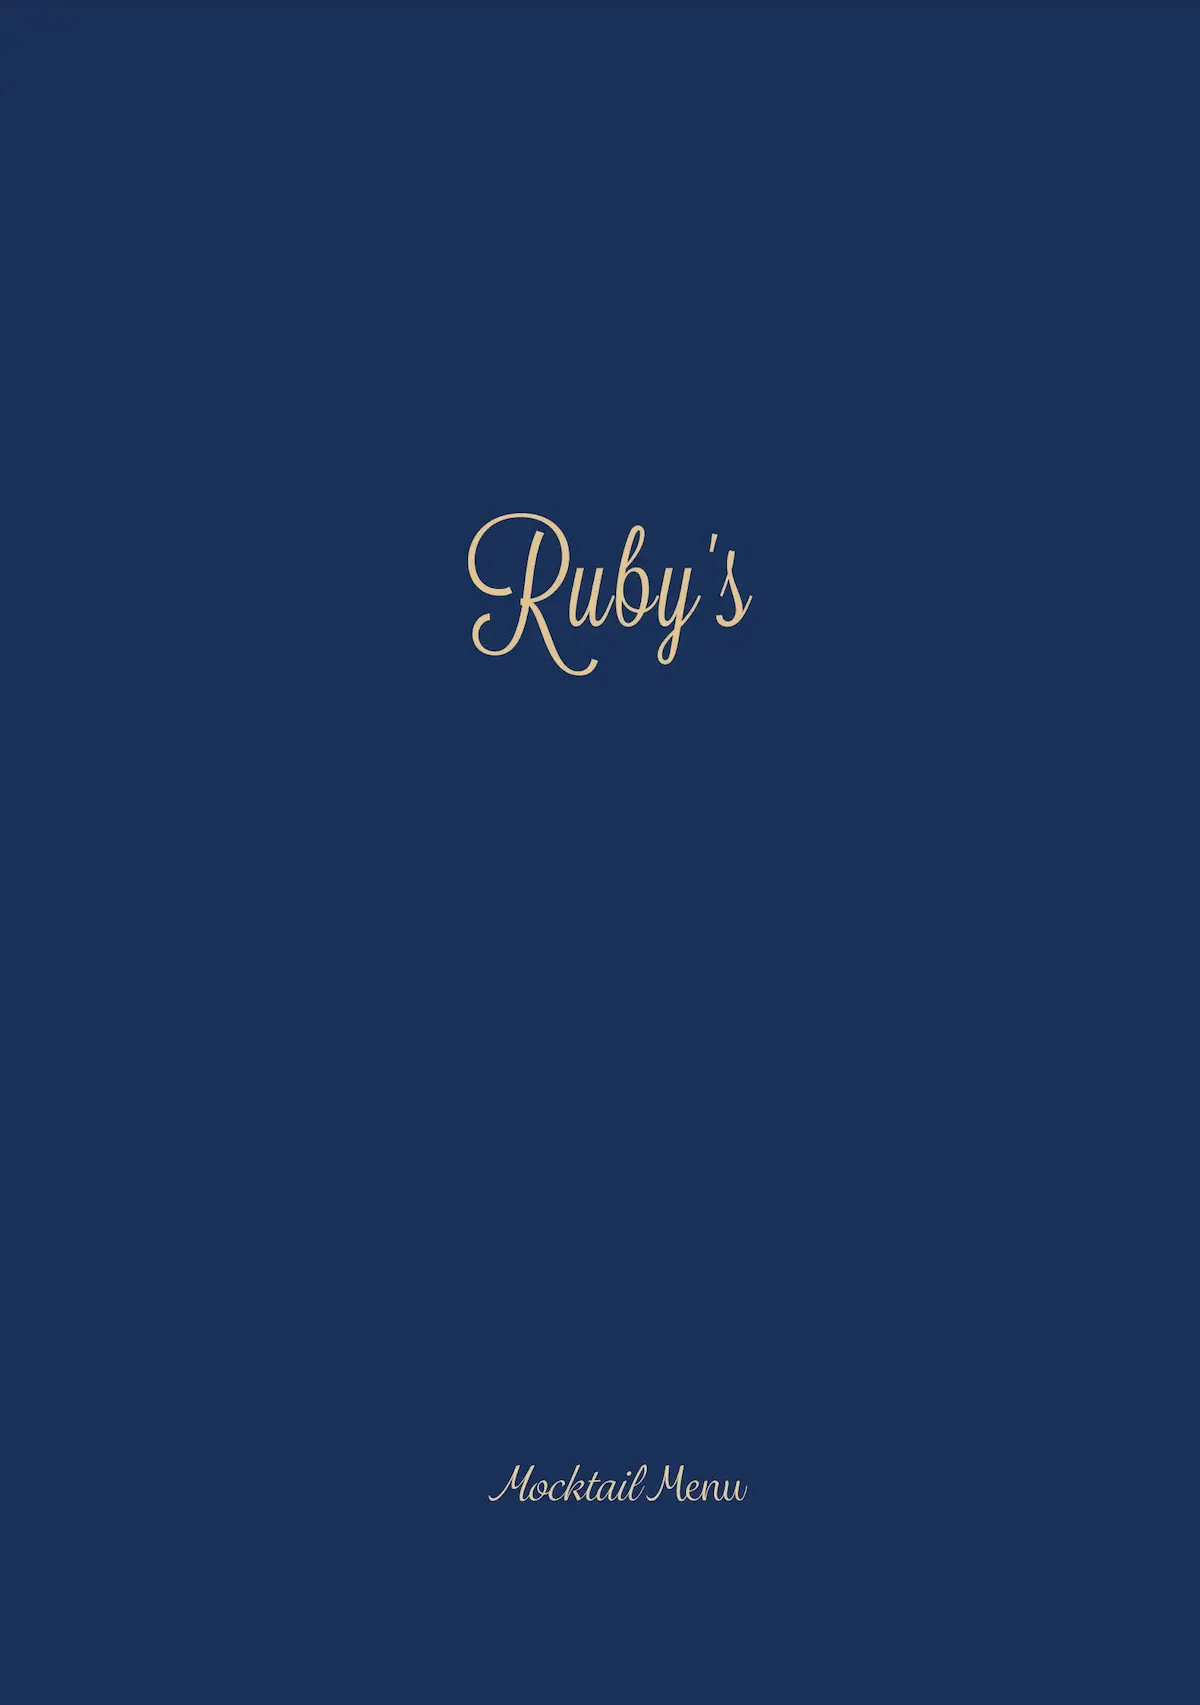 Cover of the Ruby's mocktail menu